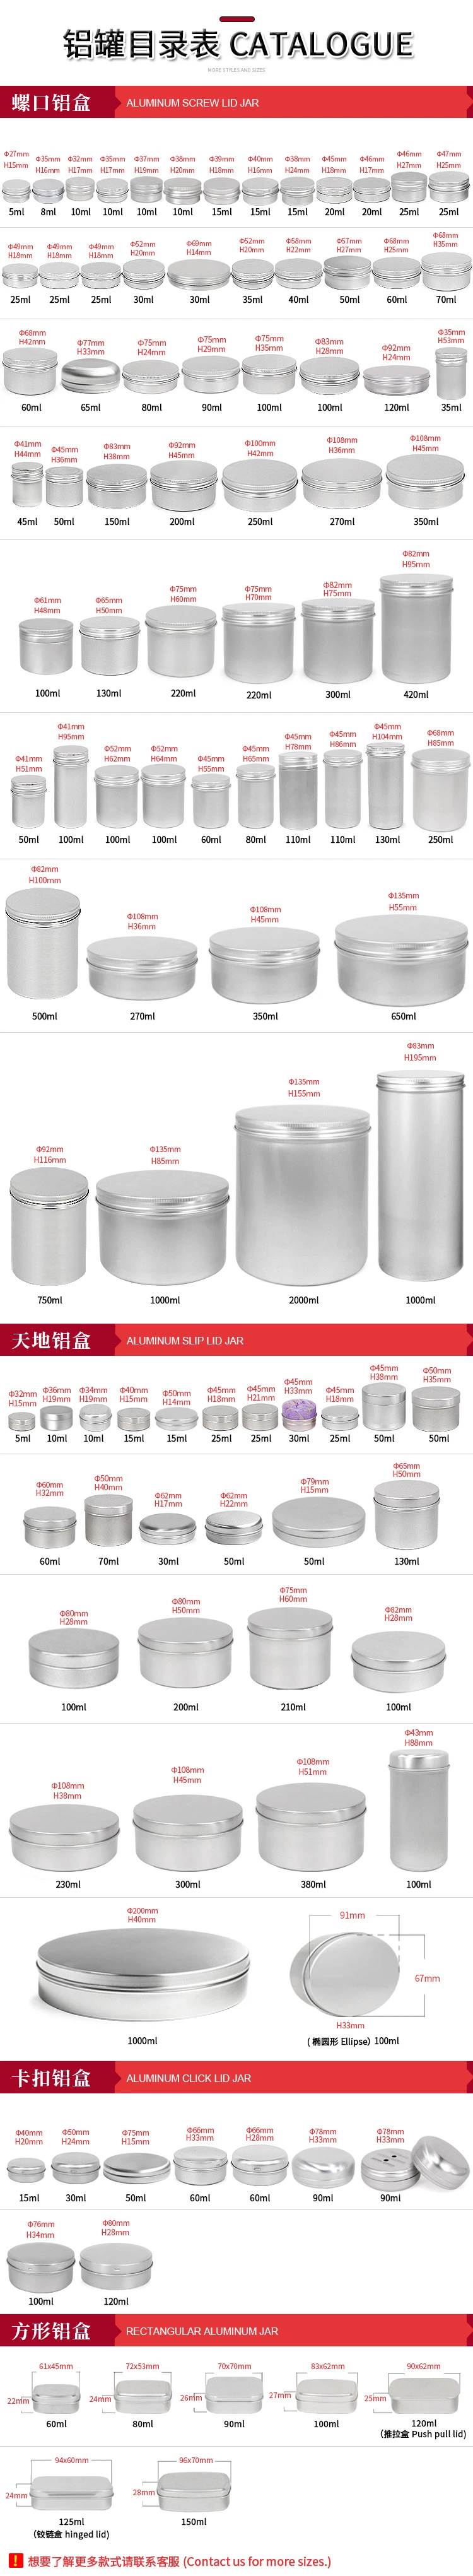 Wholesale 150ml Matte Black Pomade Styling Metal Packaging Tin Box Hair Wax Pomade Tin Container